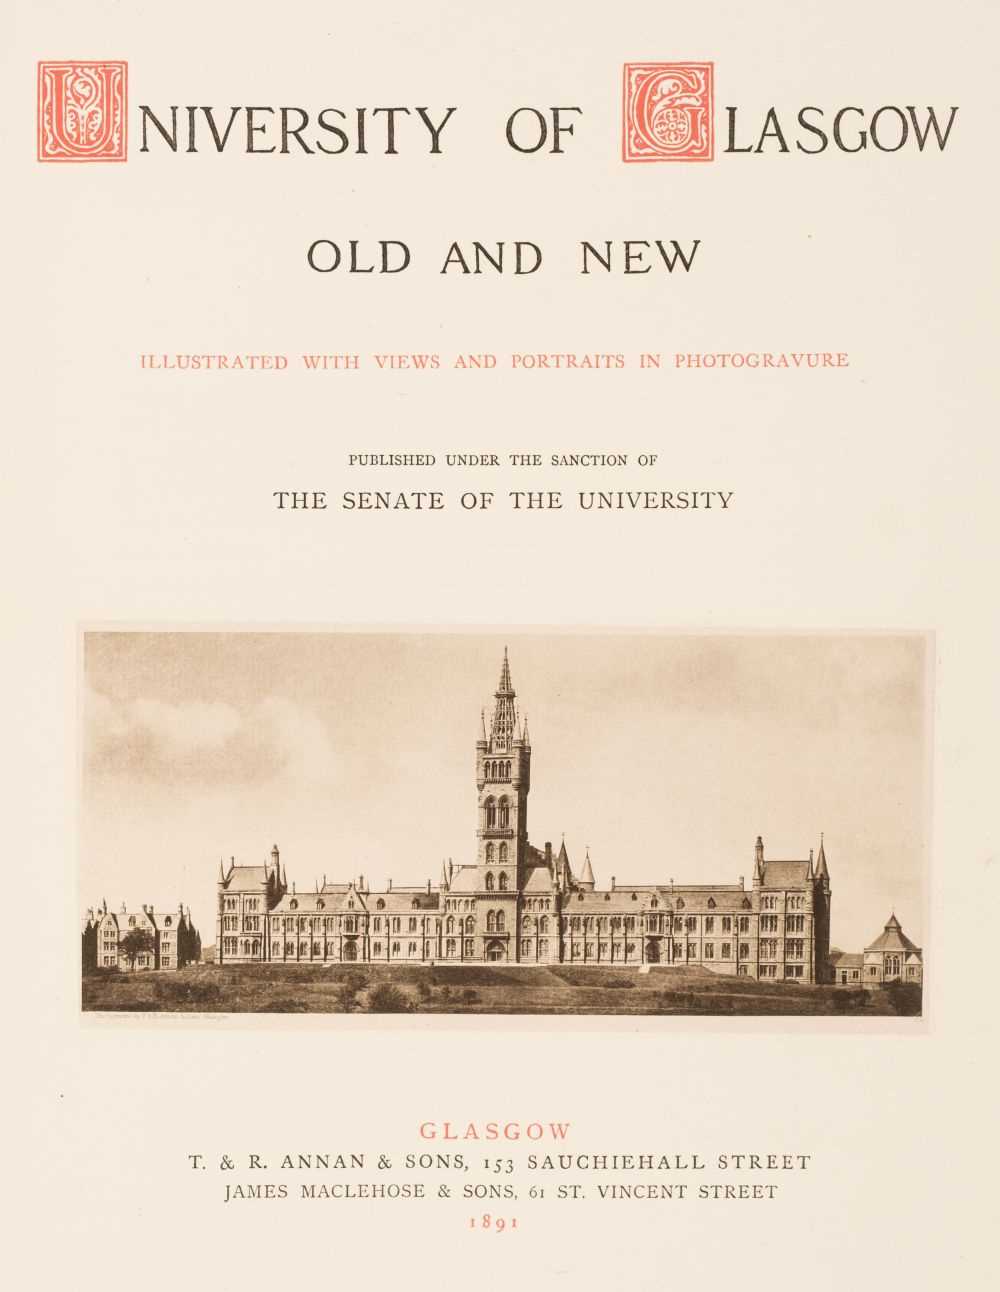 Lot 109 - Annan (Thomas). University of Glasgow Old and New, 1891